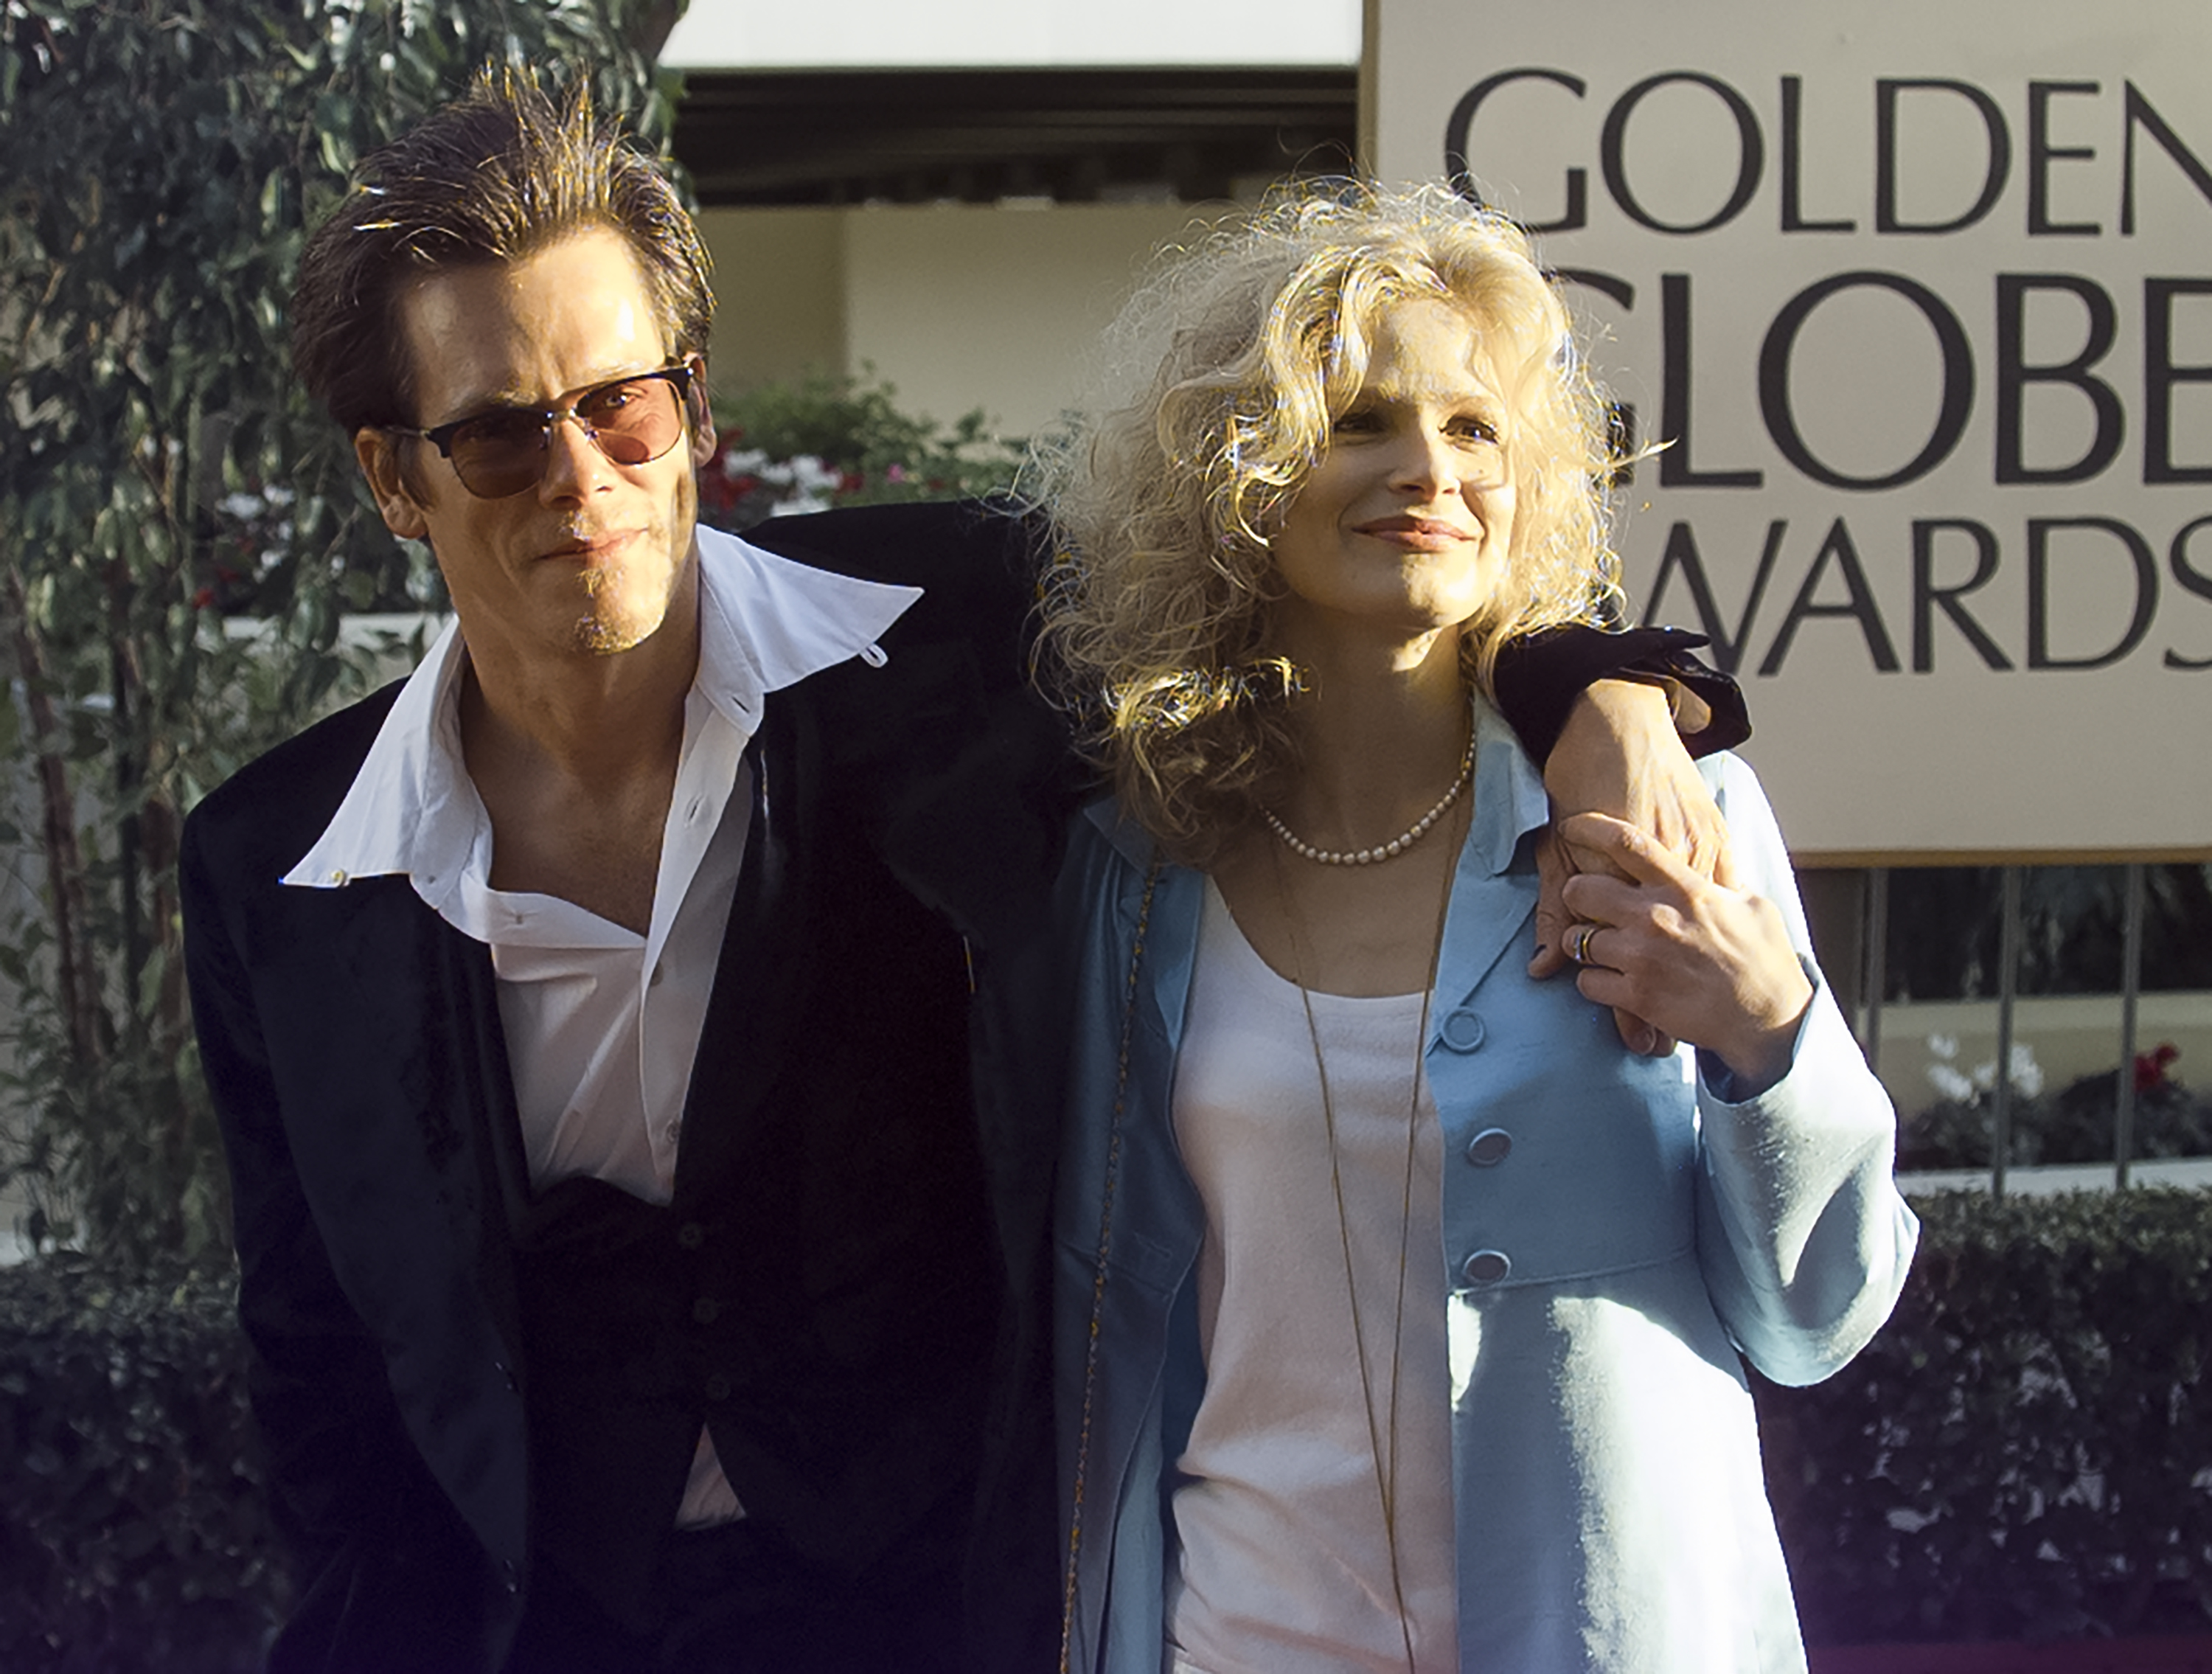 Kevin Bacon and Kyra Sedgwick January 19, 1997 in Beverly Hills, California. | Source: Getty Images